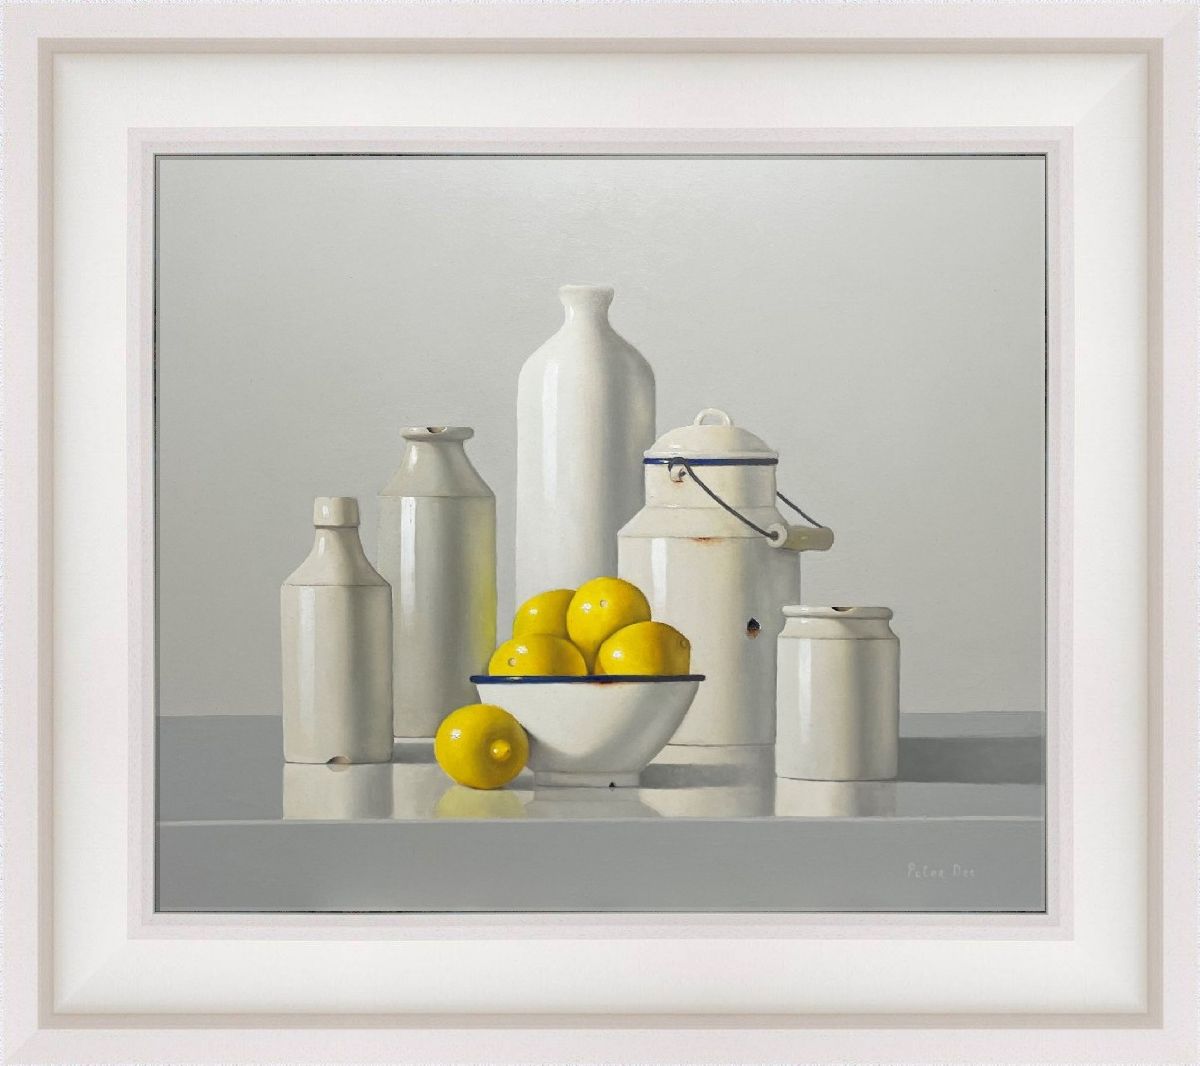 Vintage Stoneware and Enamelware with Lemons by Peter Dee